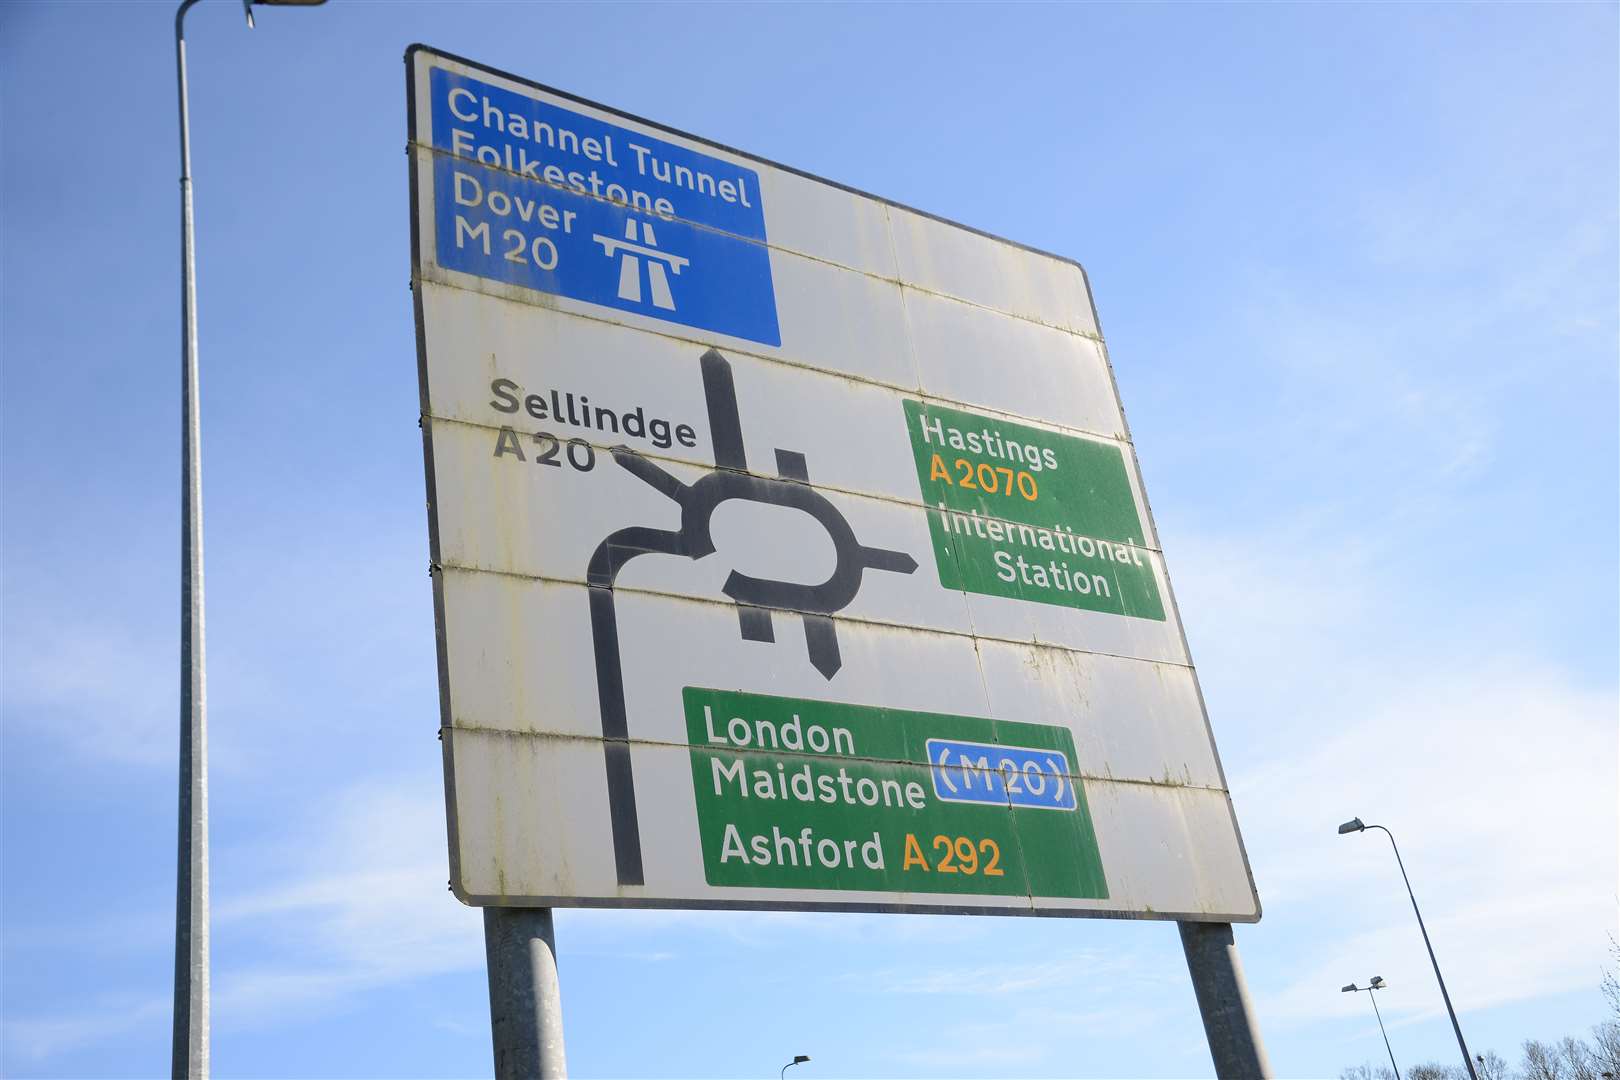 Junction 10 of the M20